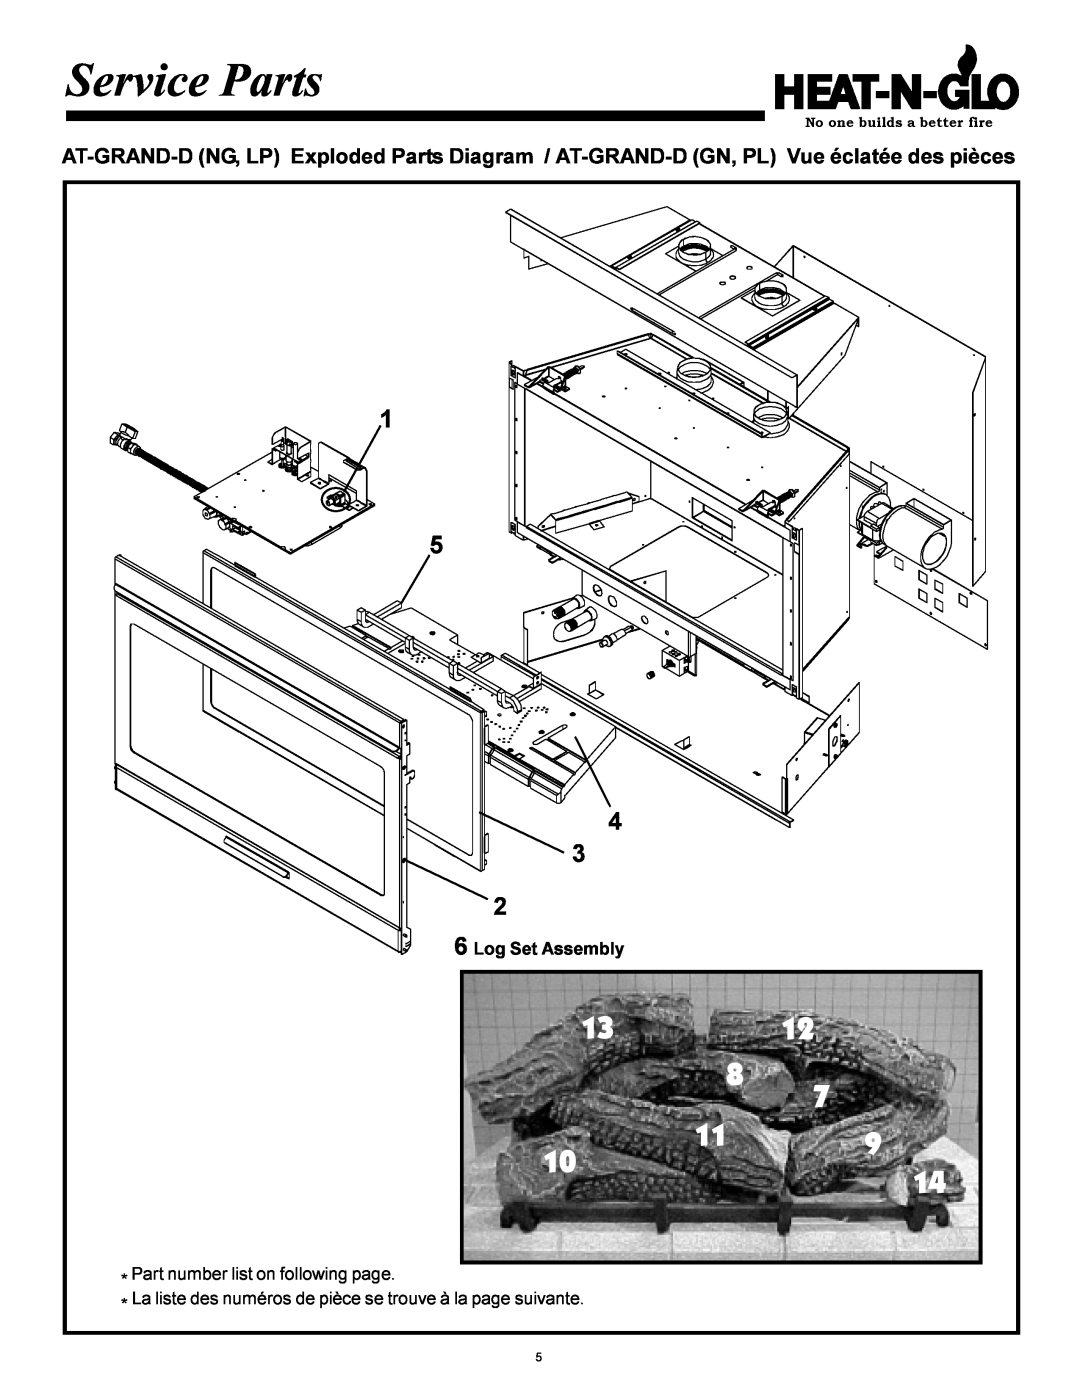 Heat & Glo LifeStyle AT-GRAND-D manual Service Parts, 6Log Set Assembly 